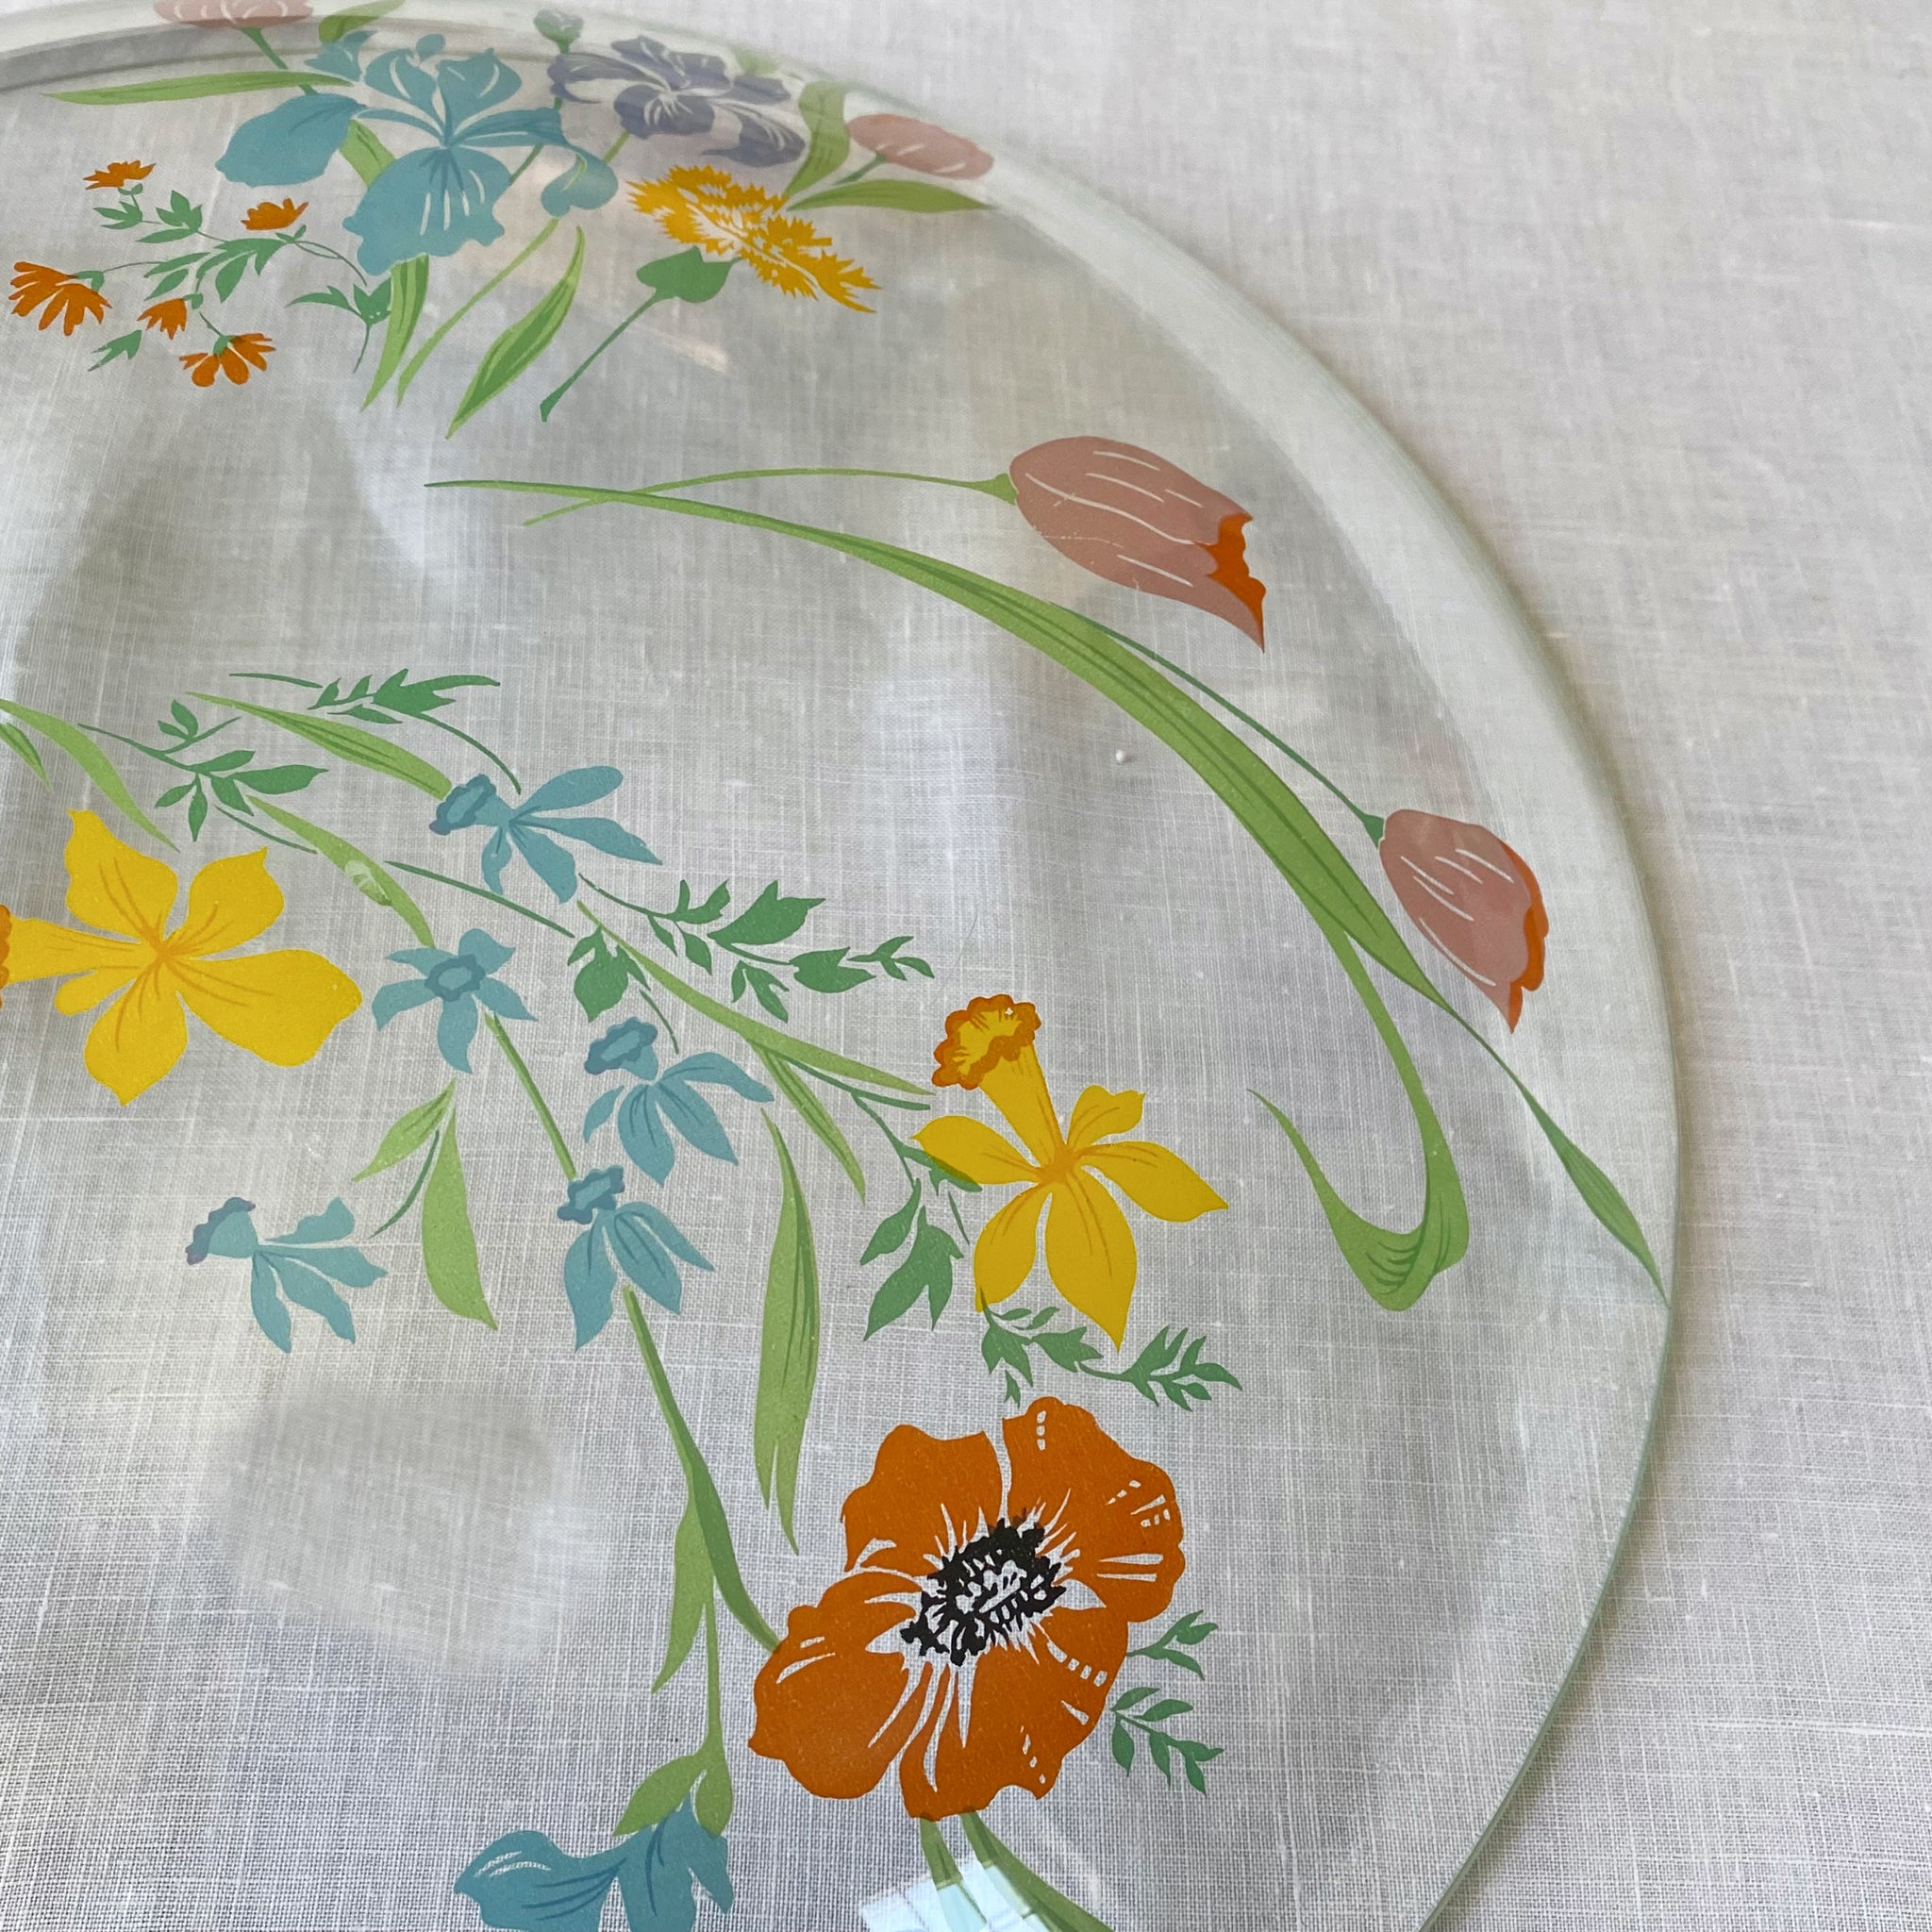 Vintage 1970s Shallow Glass Serving Bowl by Heinrich Primavera Pattern Made in Germany